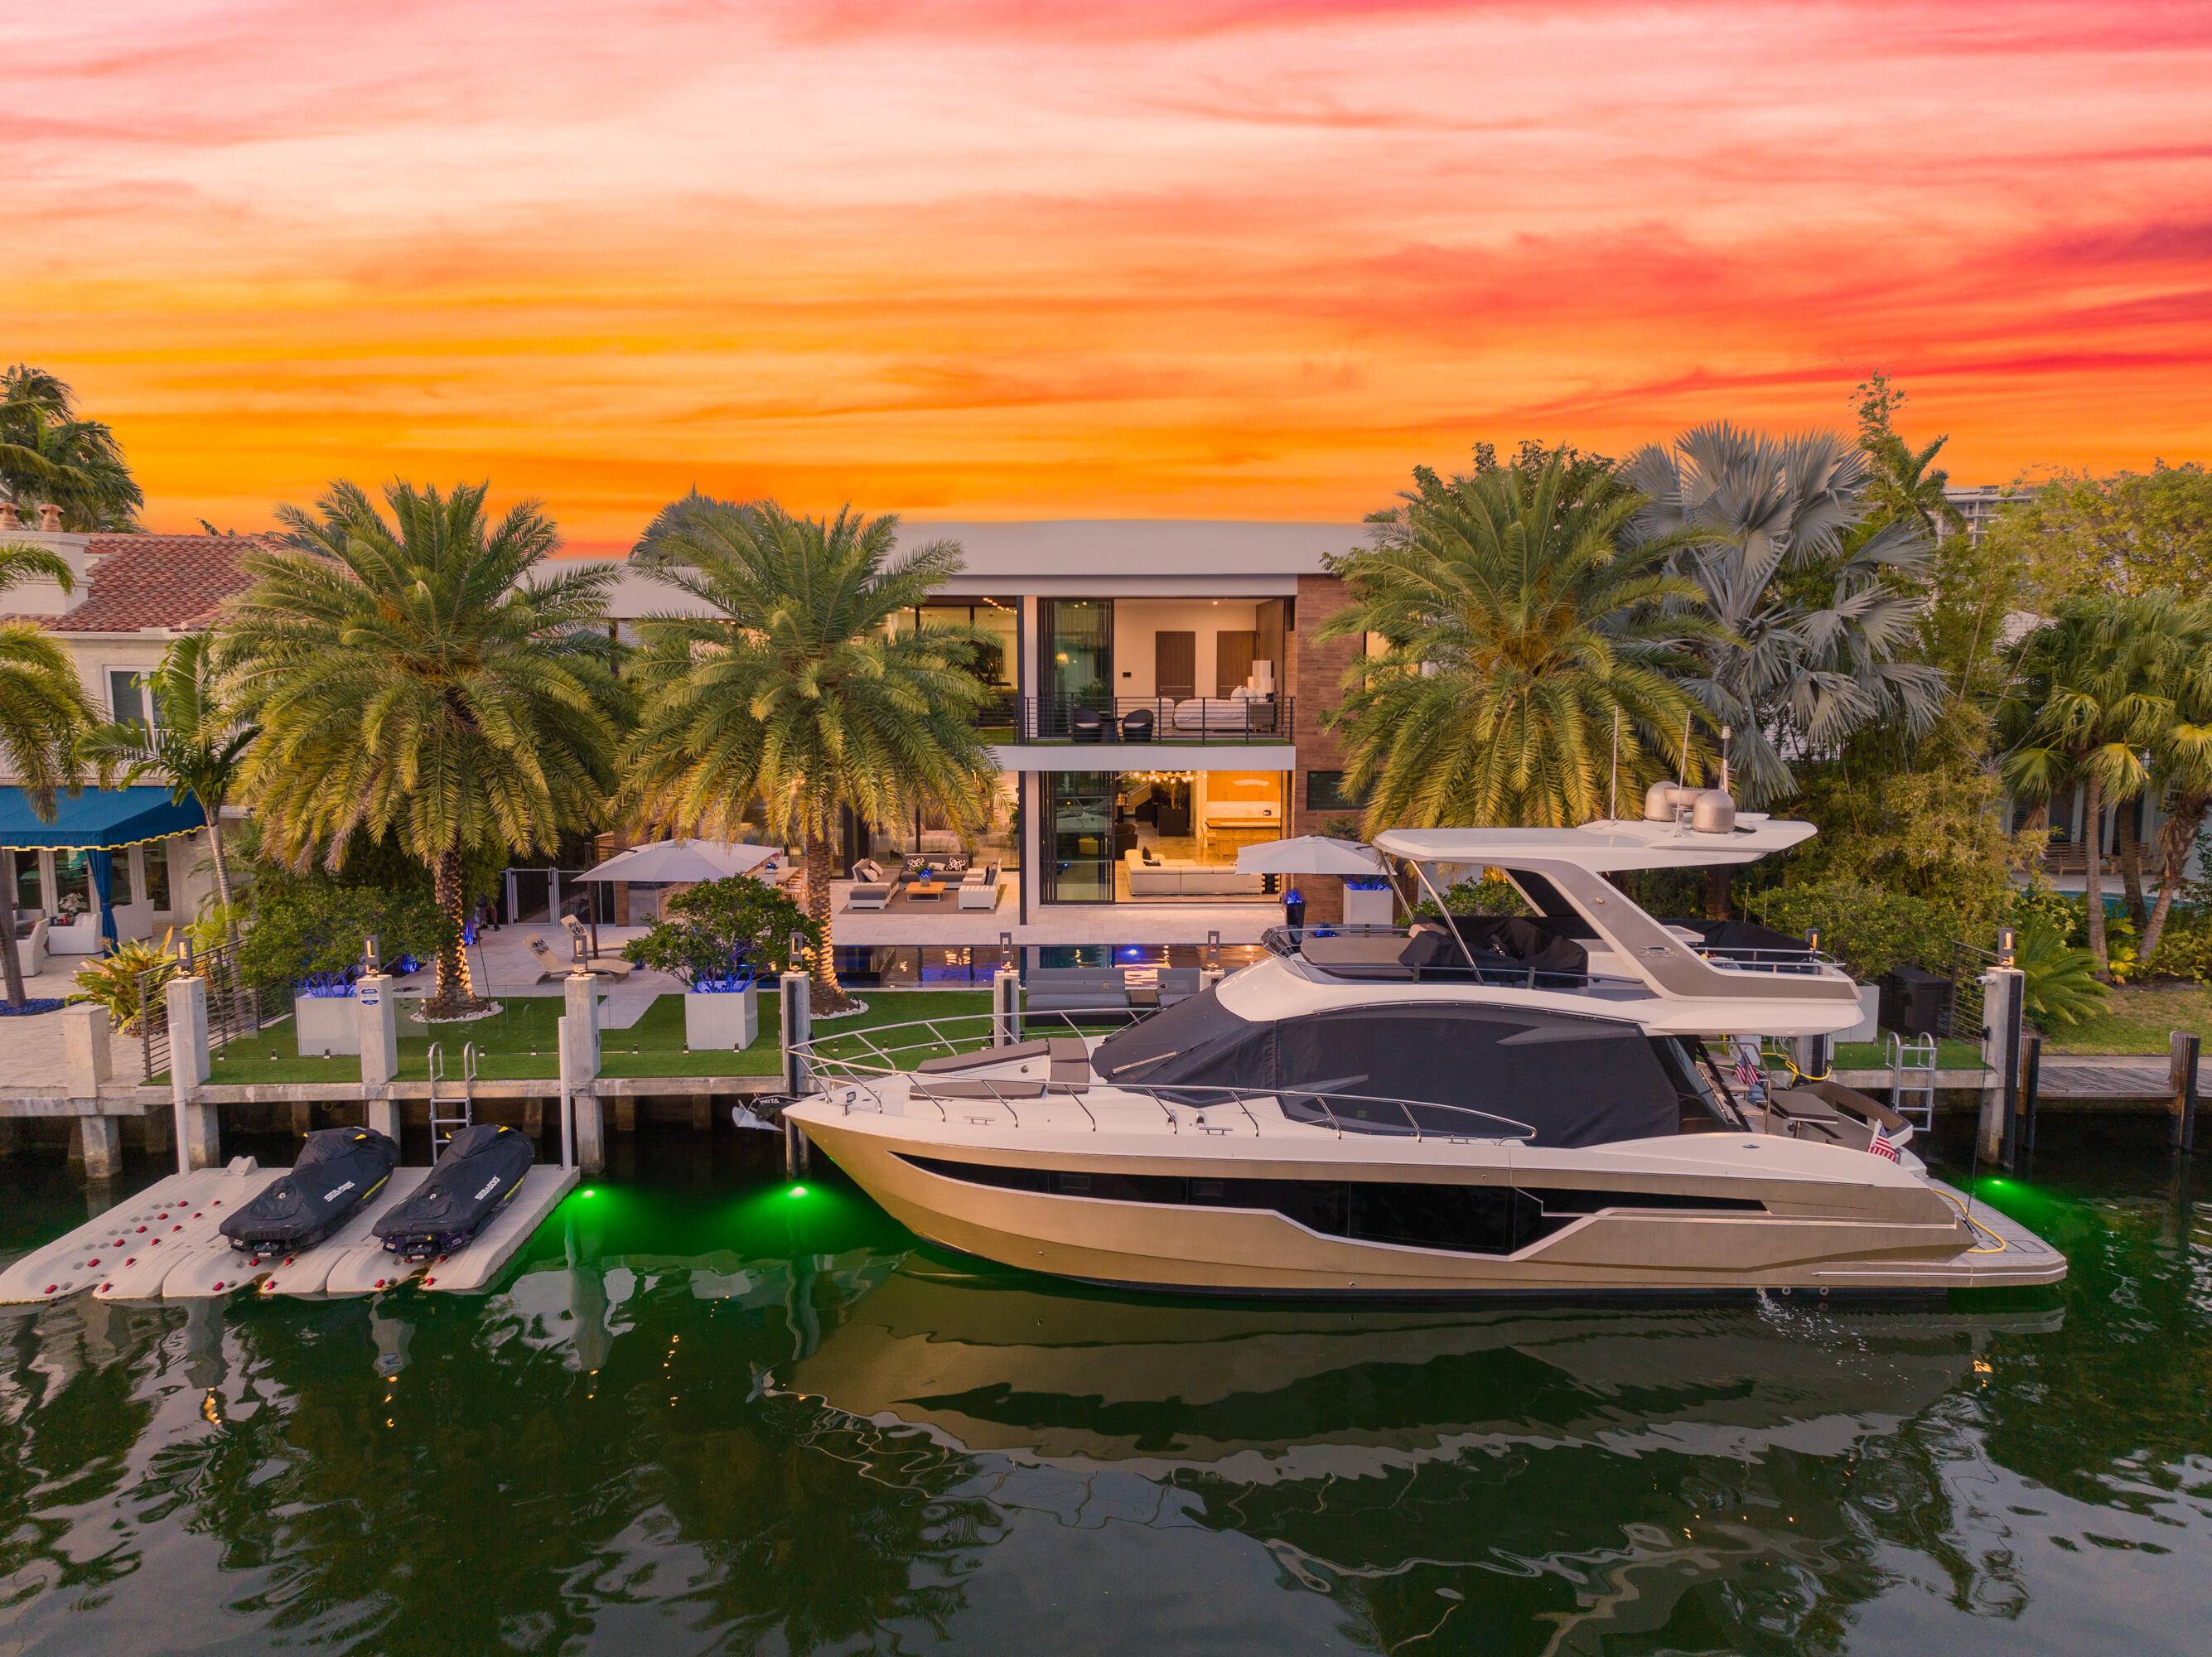 Experience an unrivaled level of sophistication and luxury with 2542 Aqua Vista Blvd, amagnificent waterfront property located in the esteemed Seven Isles community of FortLauderdale.